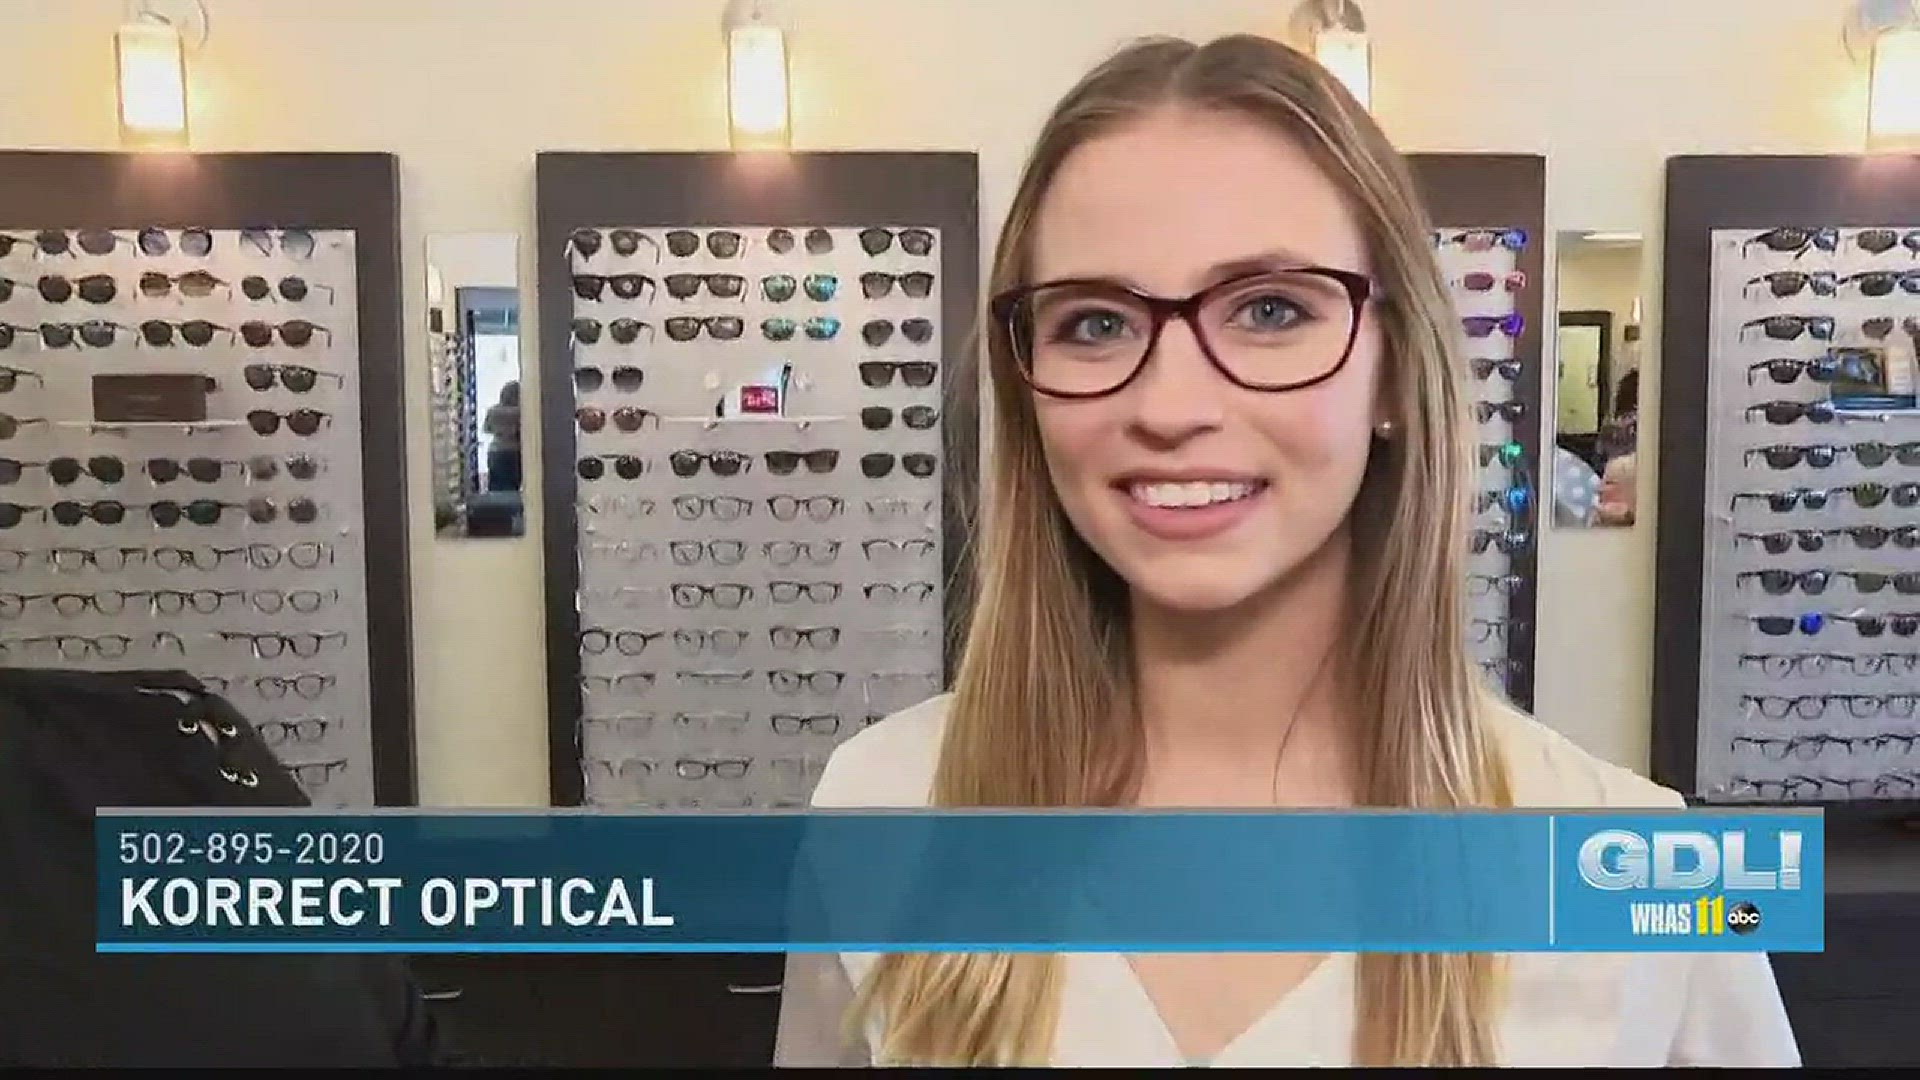 Korrect Optical's frames and lenses sale returns to save you from over paying on your eye care essentials.